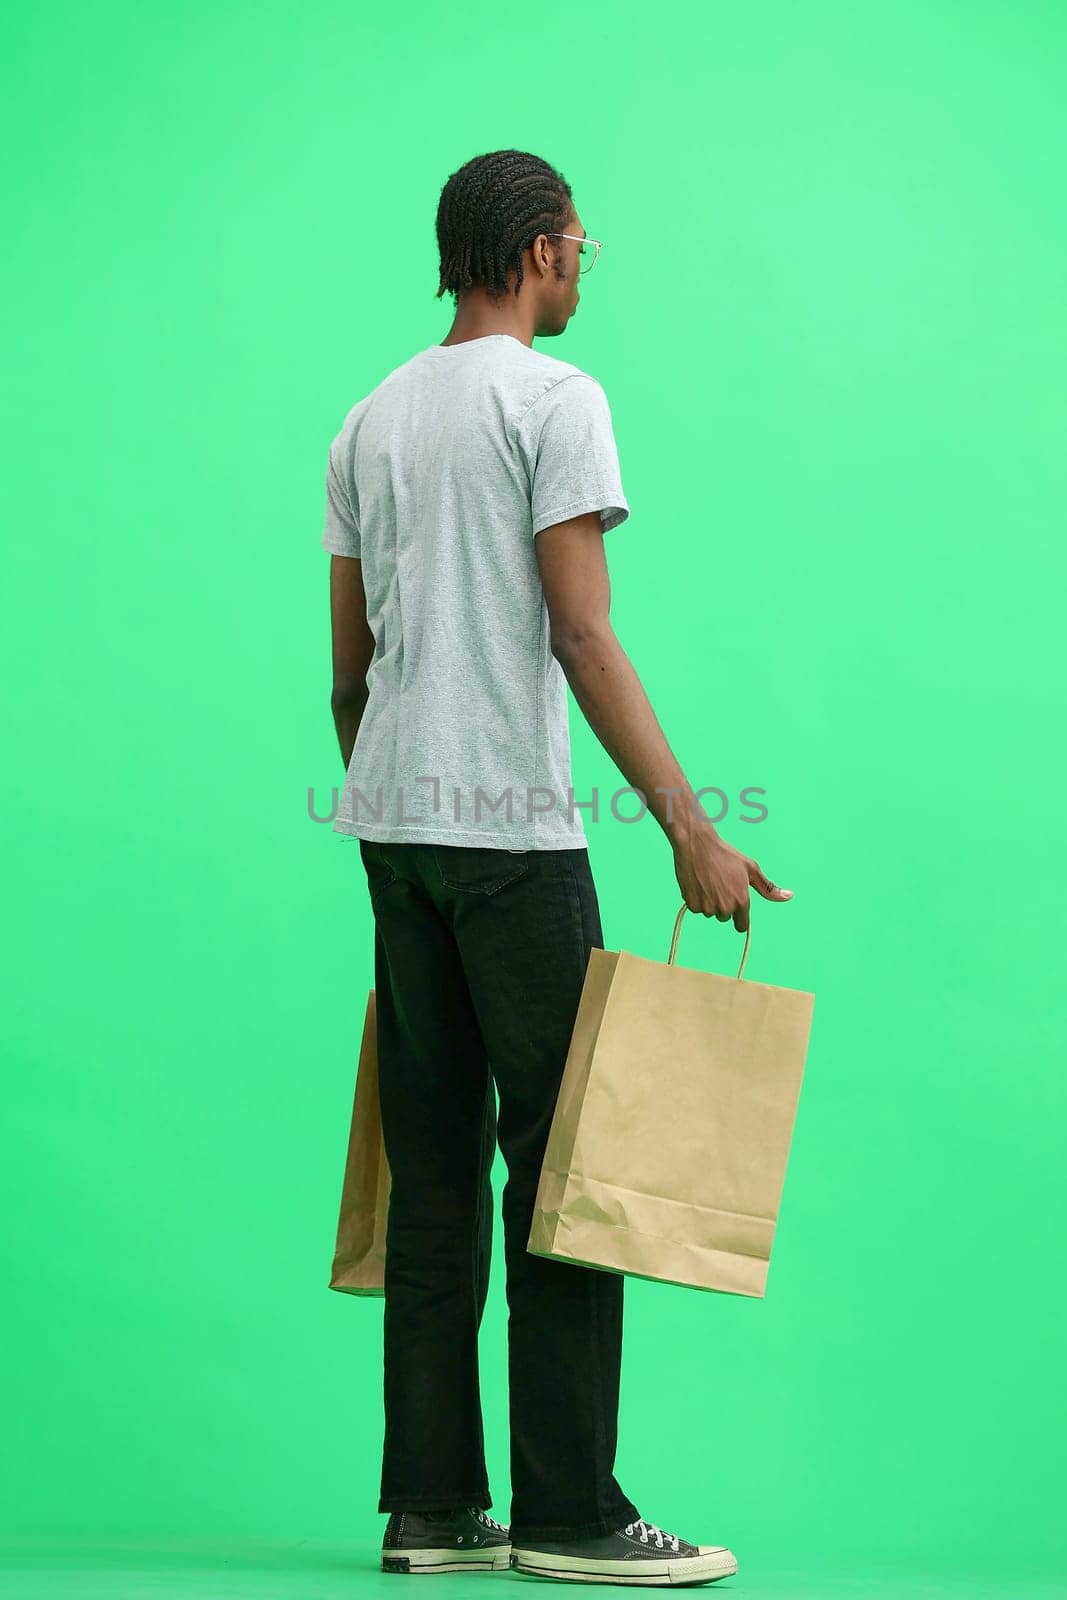 A man in a gray T-shirt, on a green background, full-length, with bags.